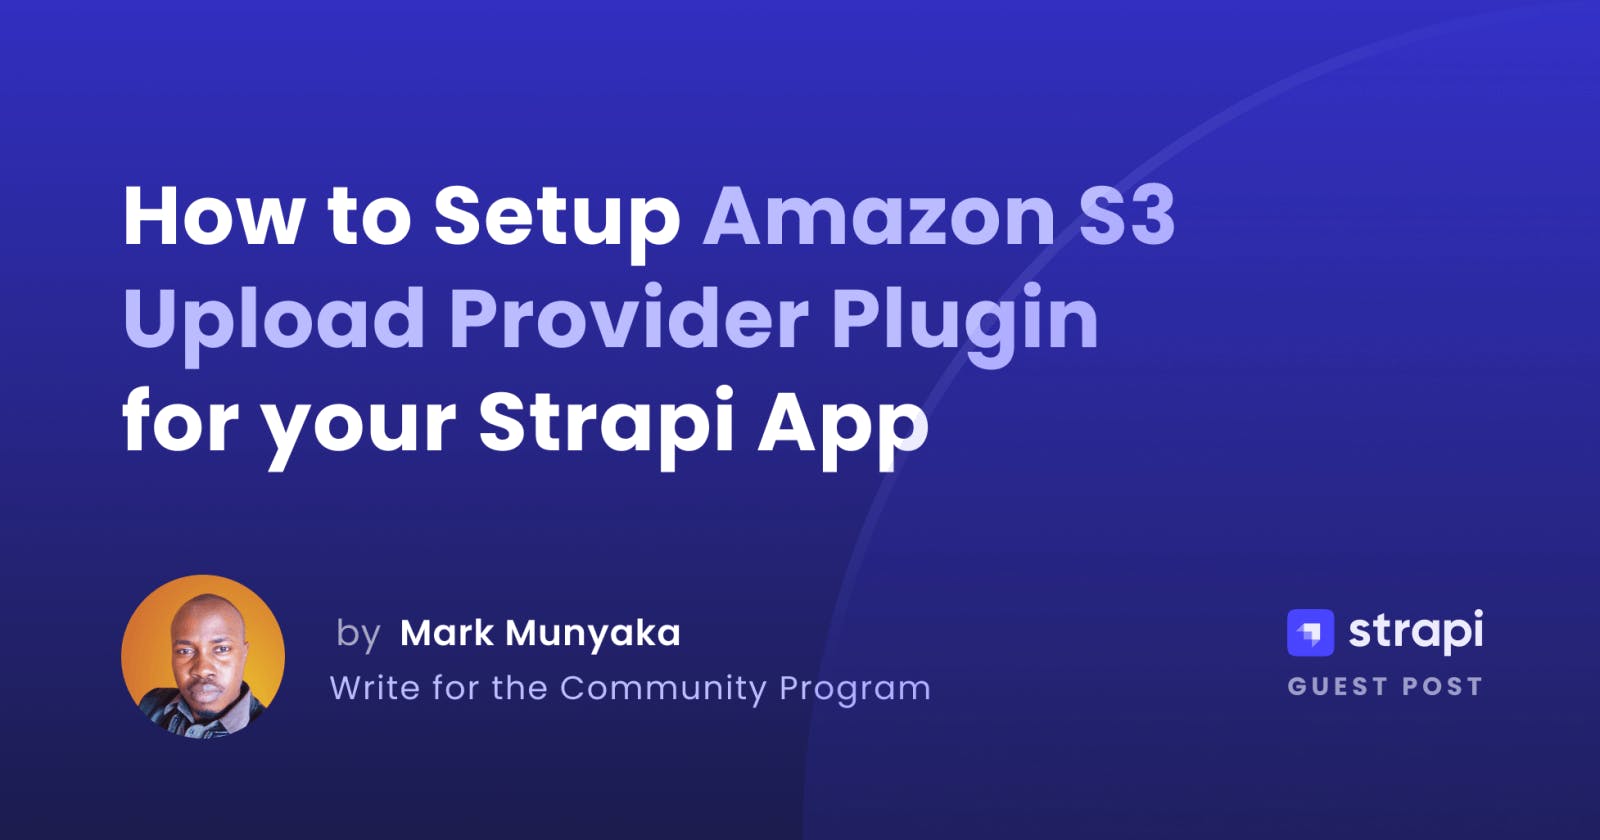 How to Set up Amazon S3 Upload Provider Plugin for Your Strapi App